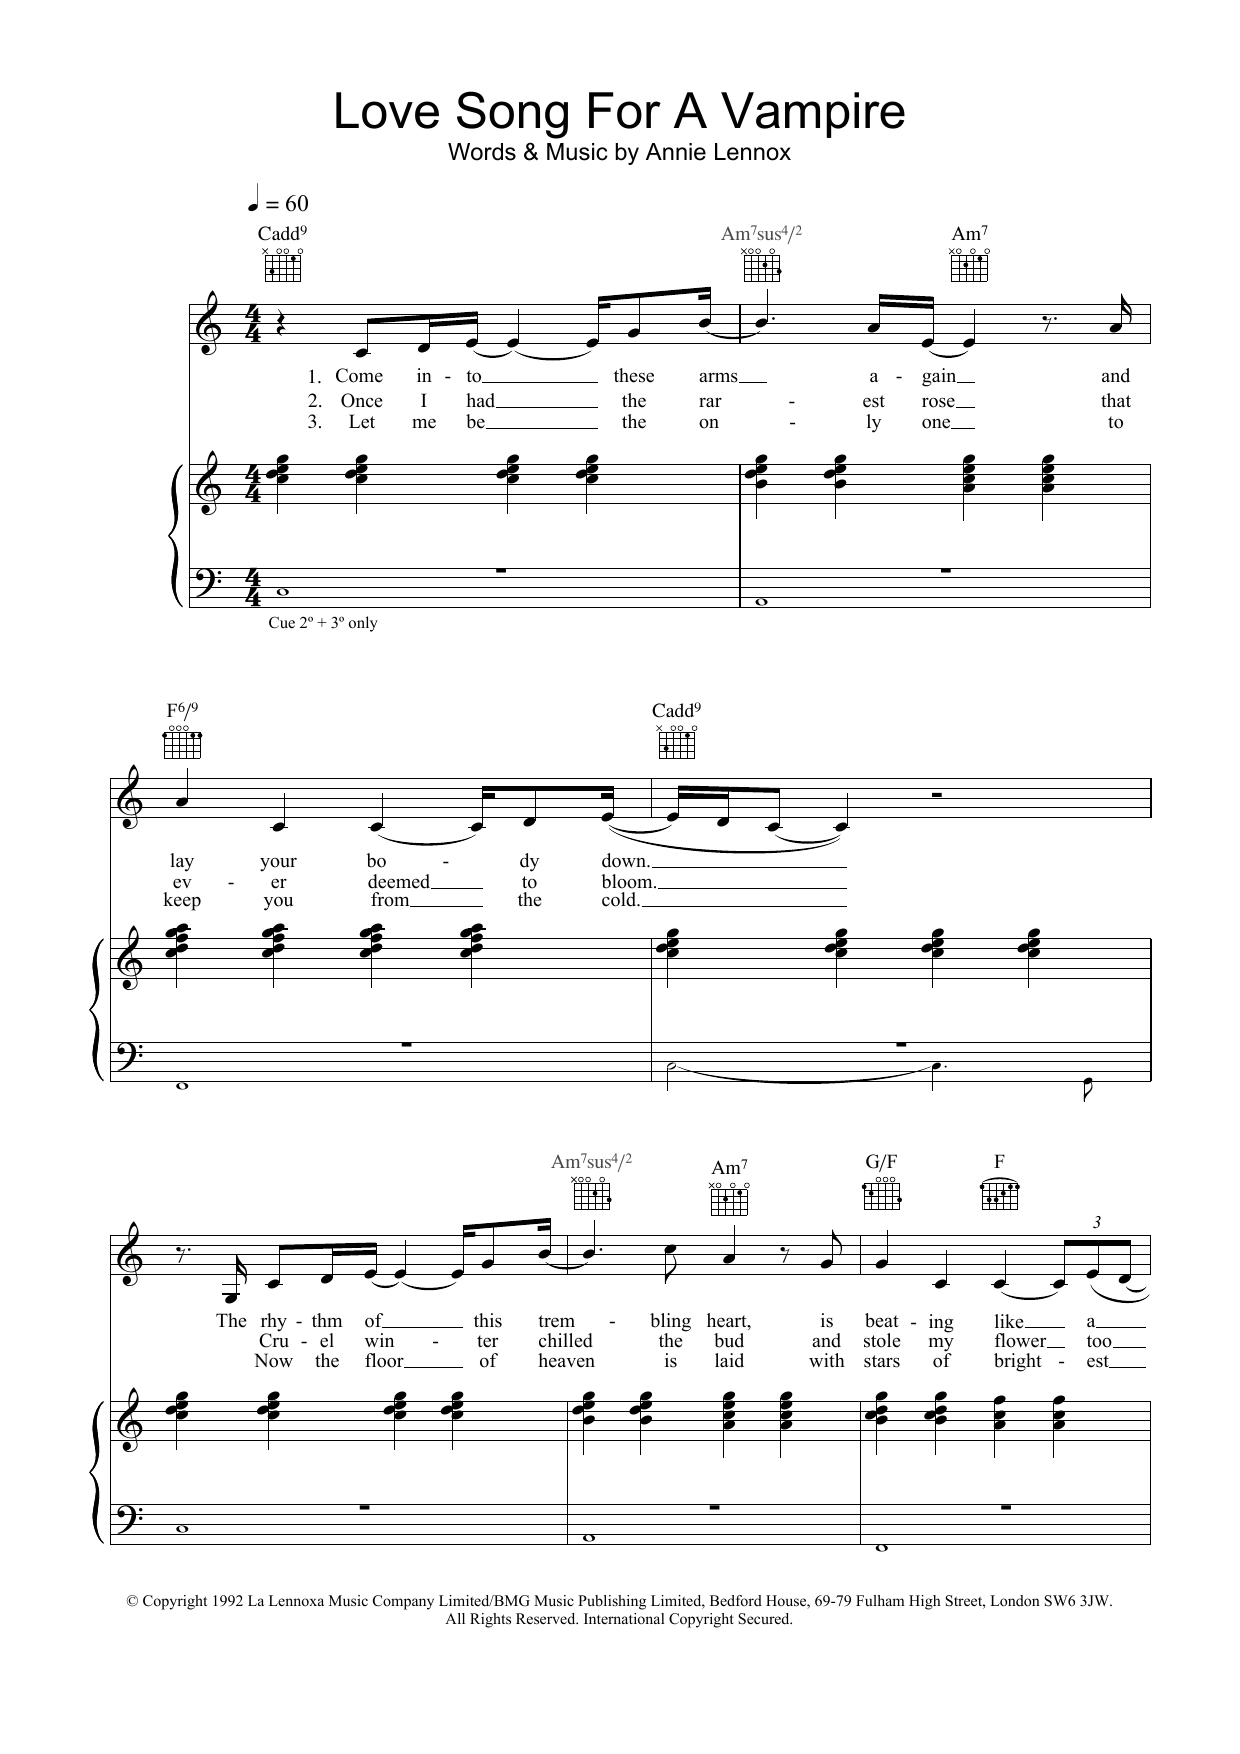 Annie Lennox Love Song For A Vampire sheet music notes and chords. Download Printable PDF.